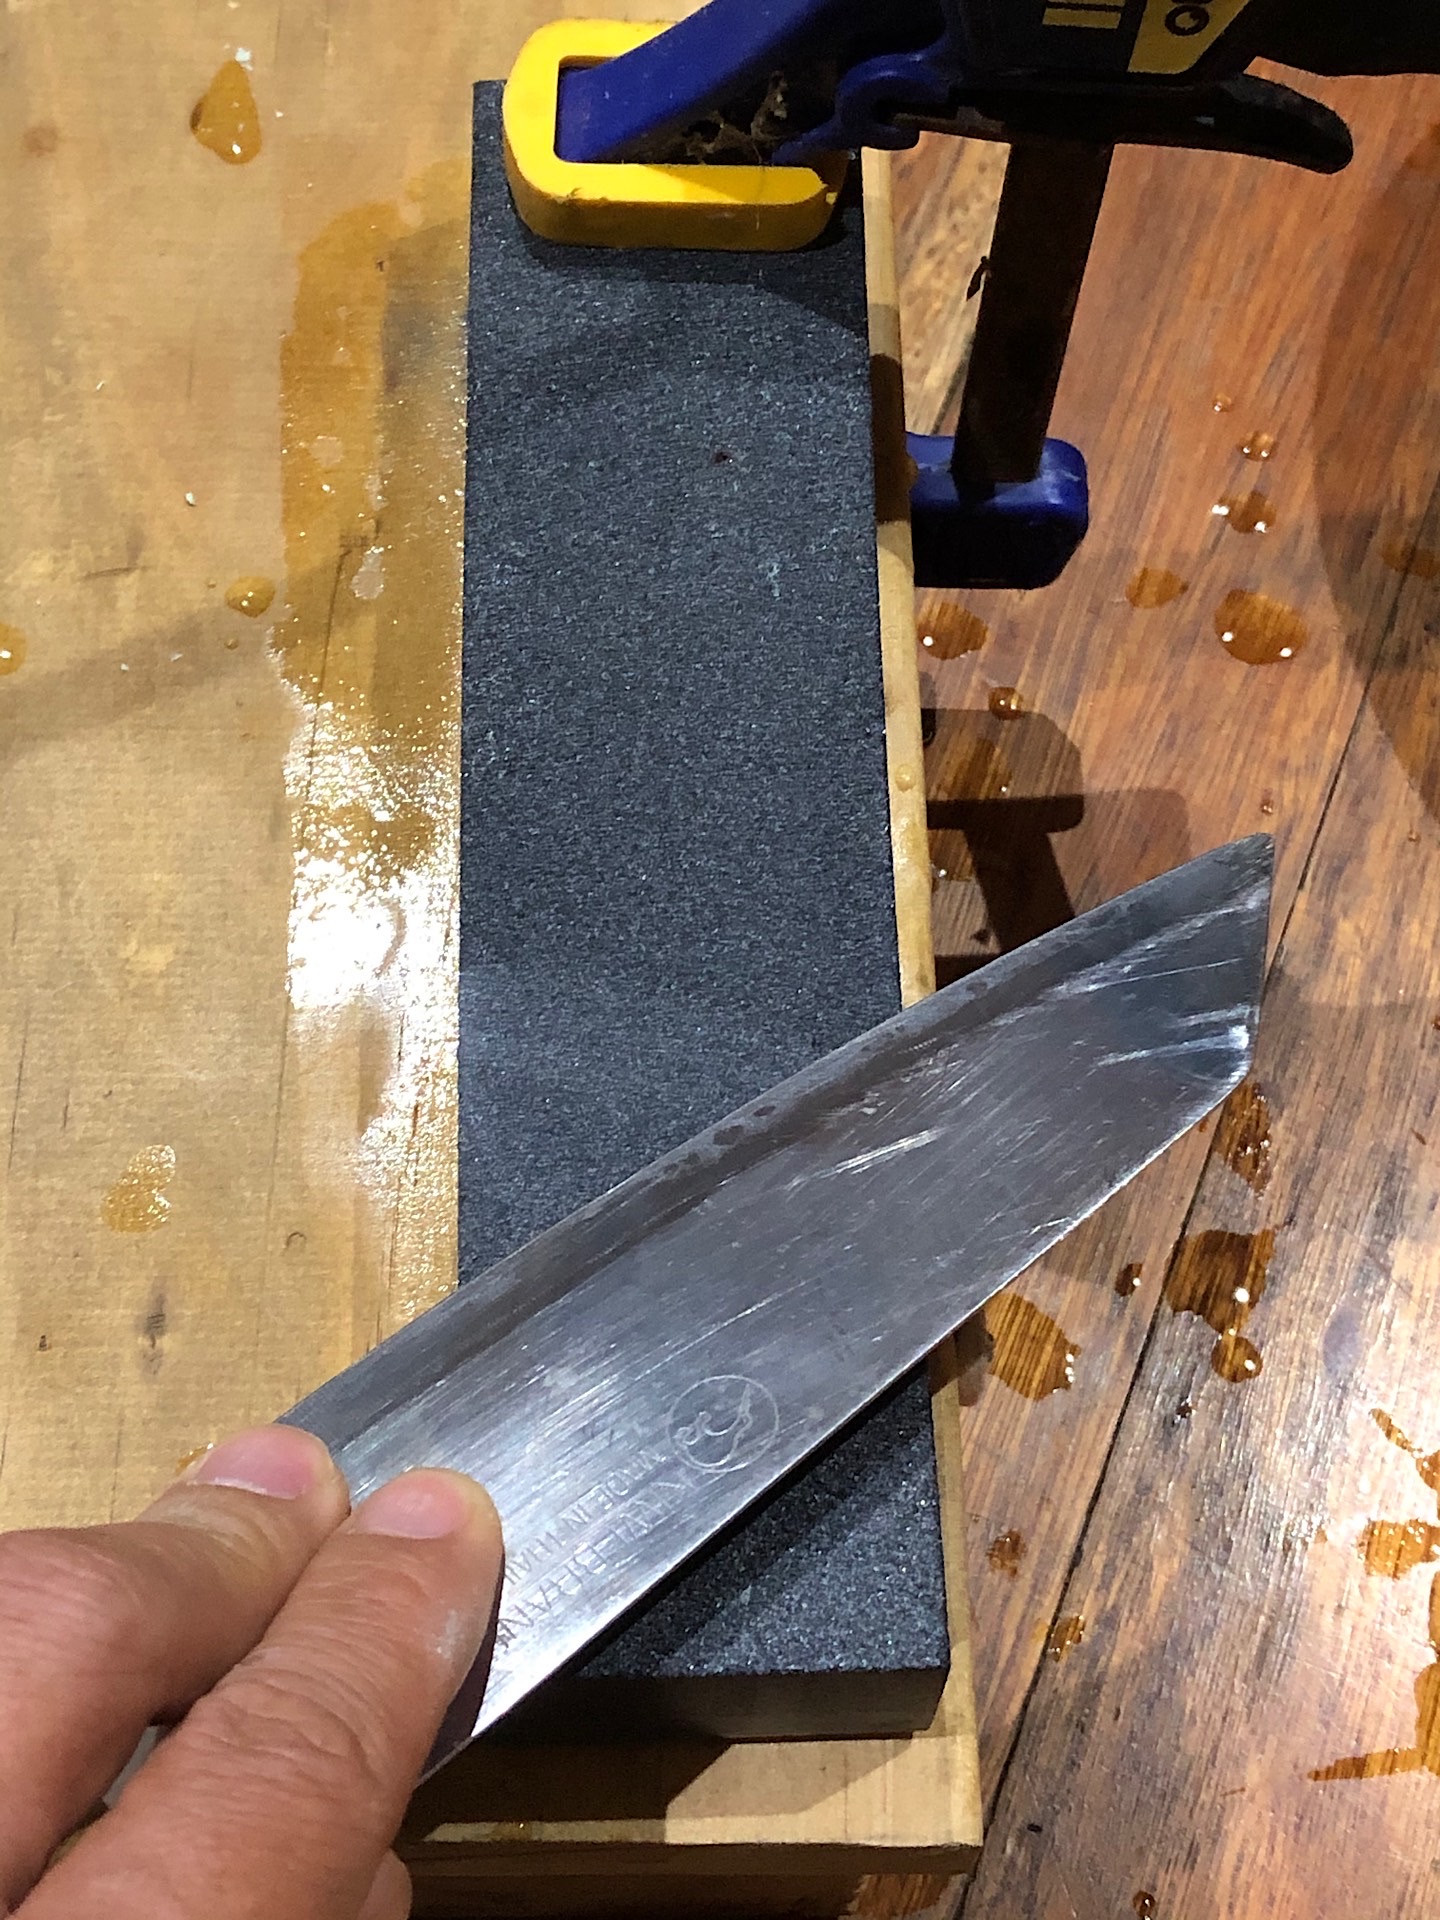 Coarse side of a sharpening stone